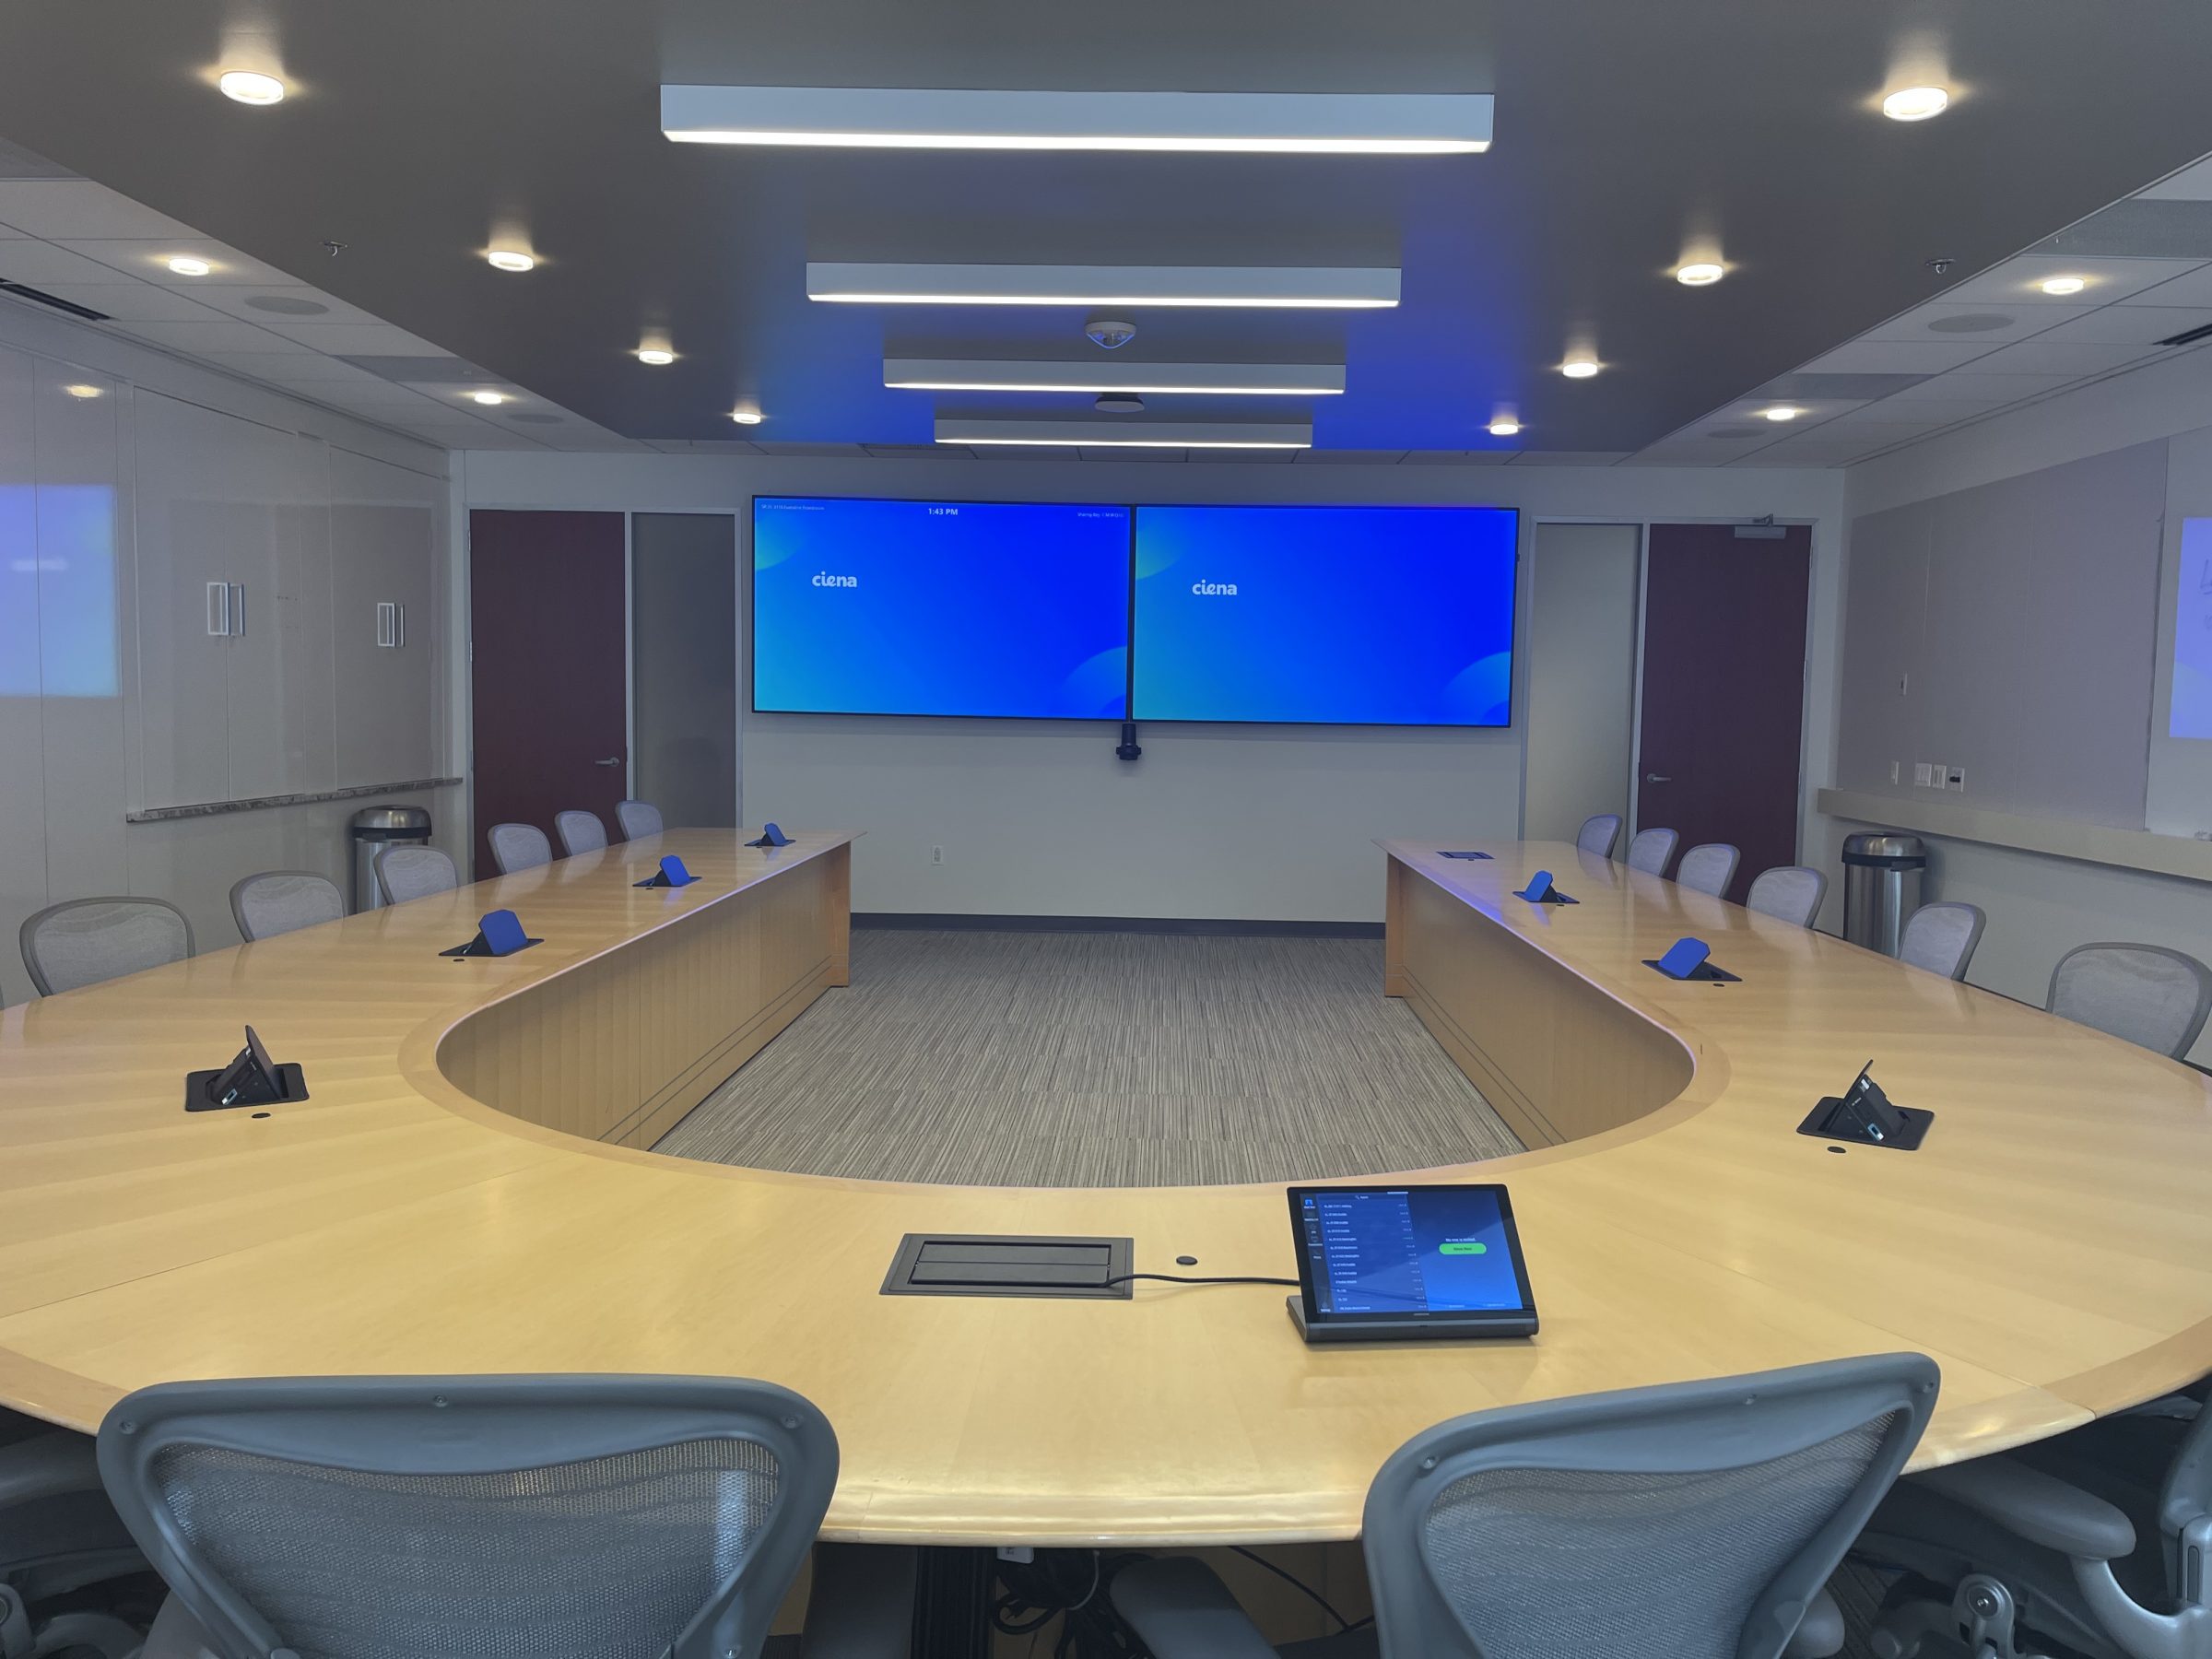 LightWerks can execute large-scale audio-visual solutions on a nationwide level.